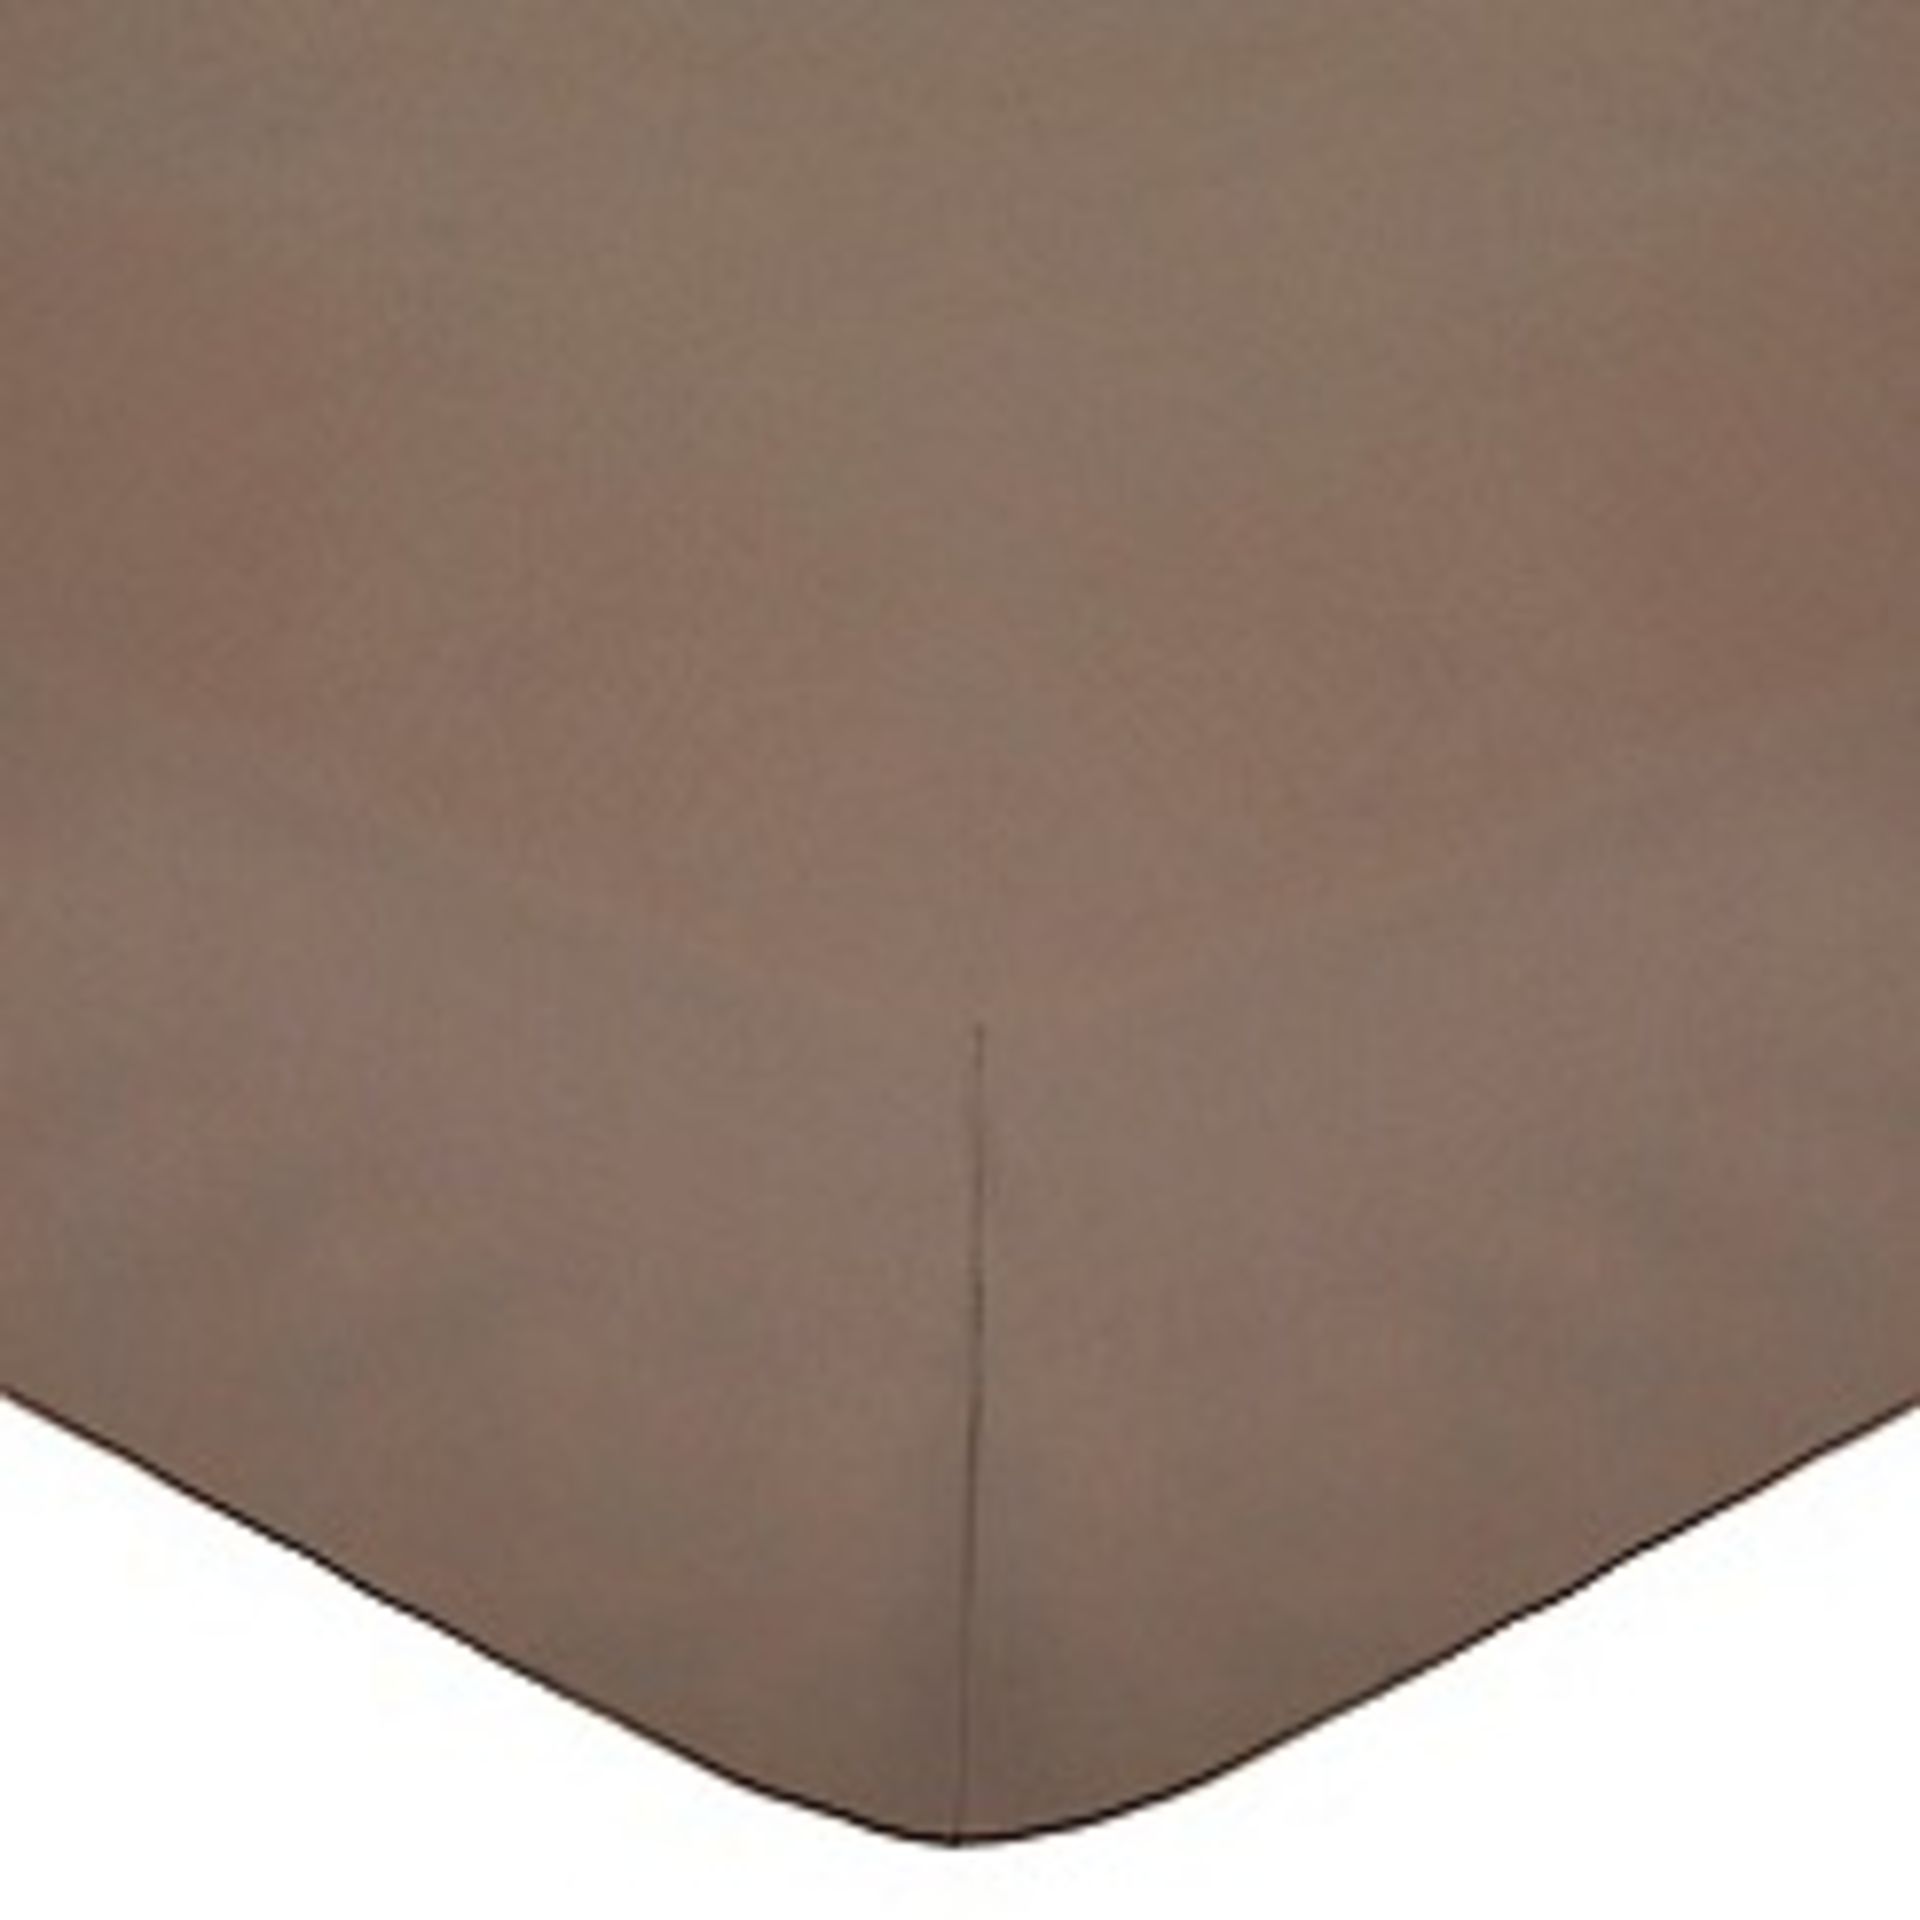 V *TRADE QTY* Brand New Luxury Egyptian Double Fitted Sheet - Biscuit X 10 YOUR BID PRICE TO BE